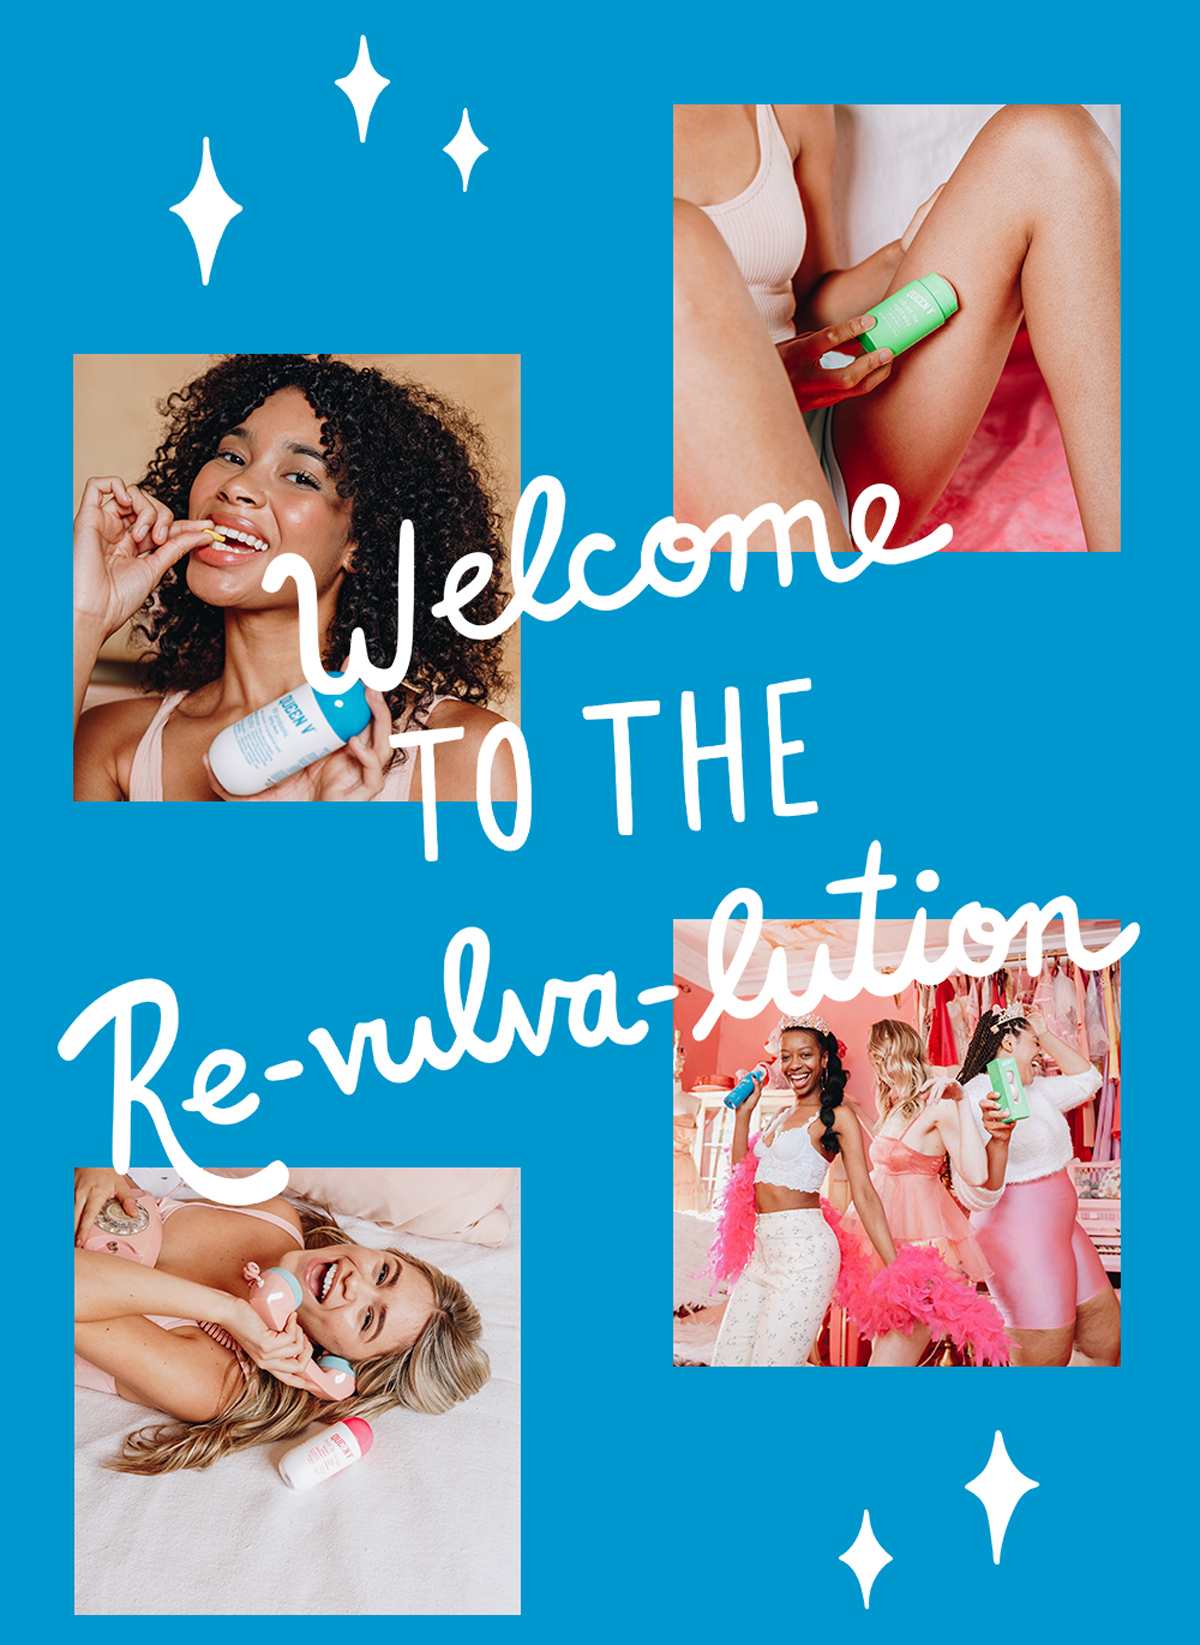 Welcome to the re-vulva-lution